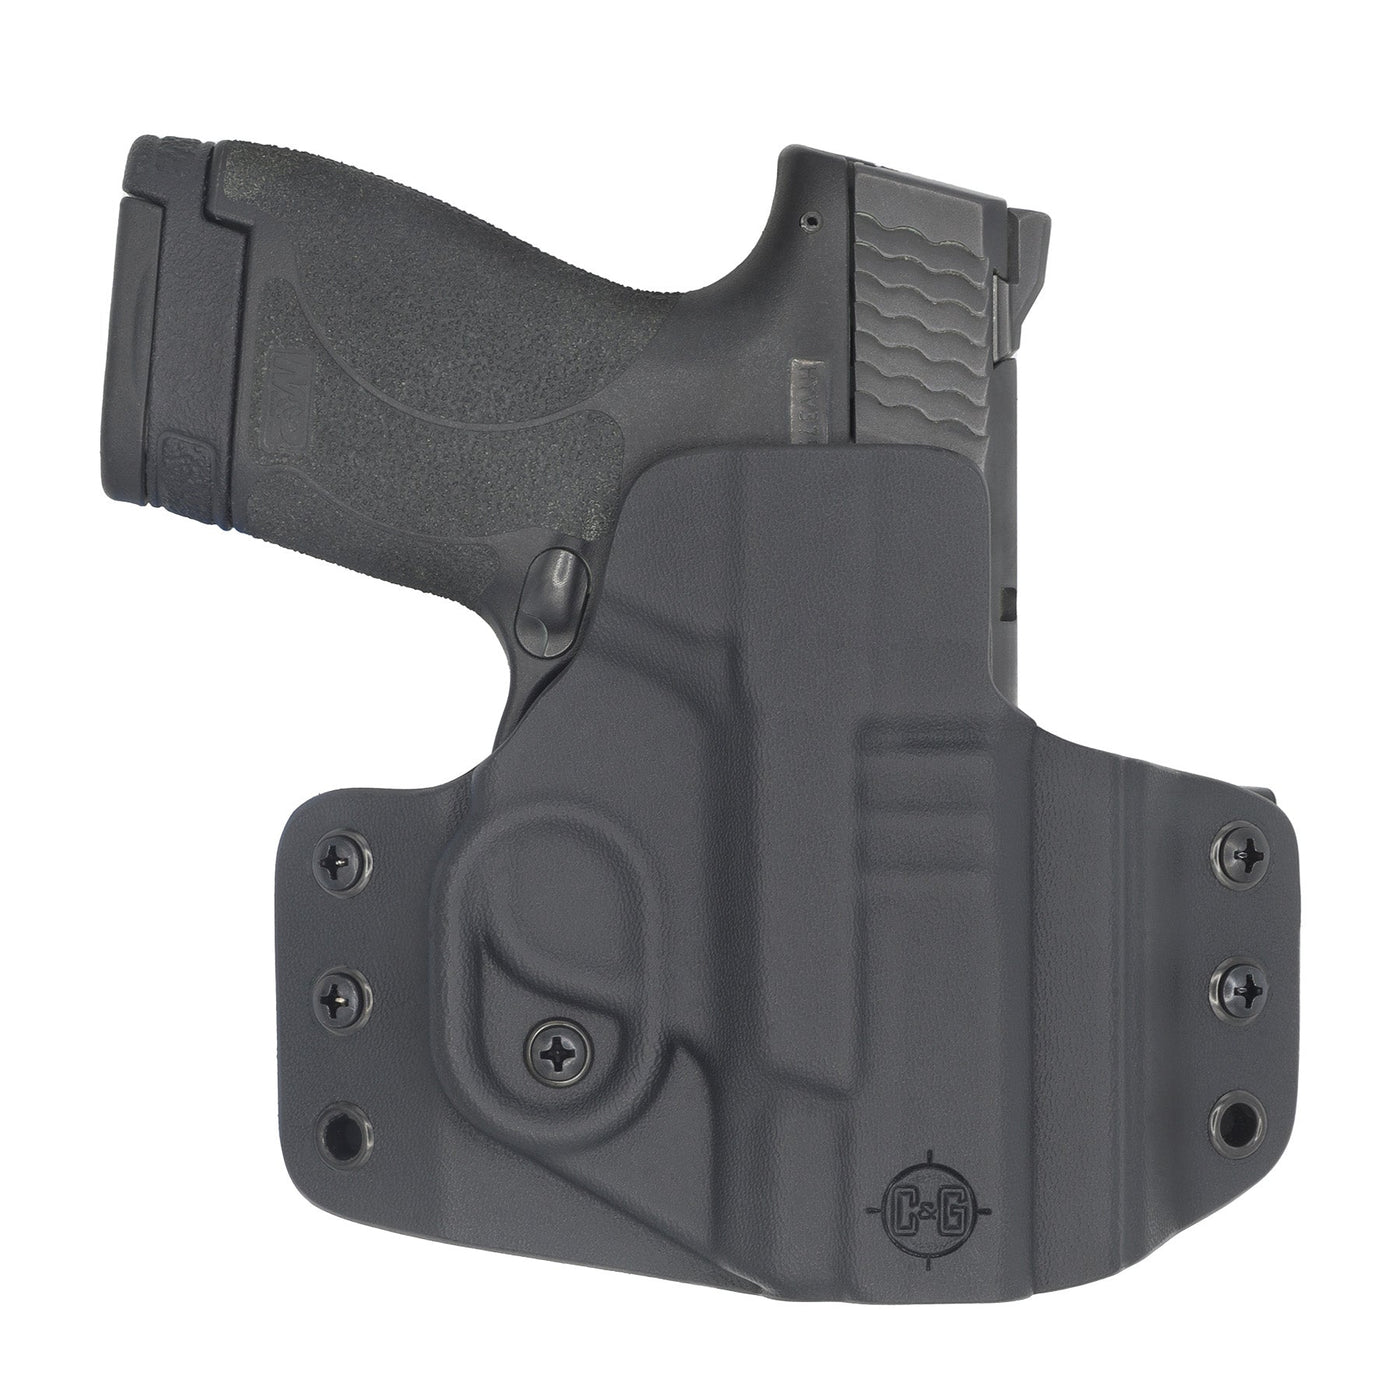 C&G Holsters quick ship Covert OWB kydex holster for Smith & Wesson M&P Shield 9/40 in black